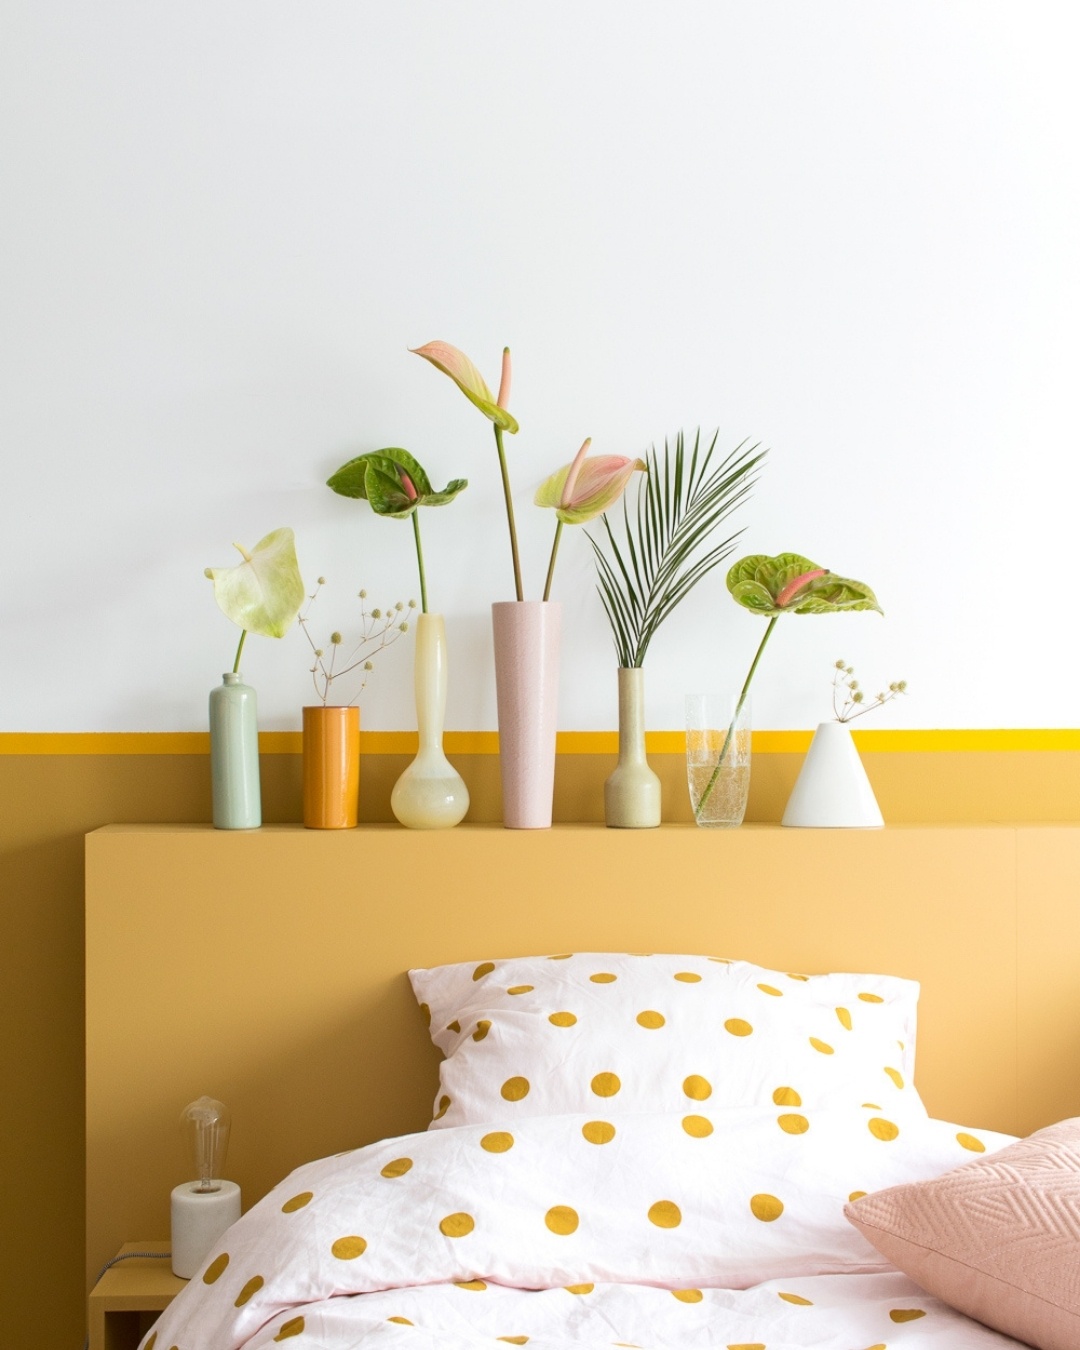 Style your interior with the Pantone color of the year 2021